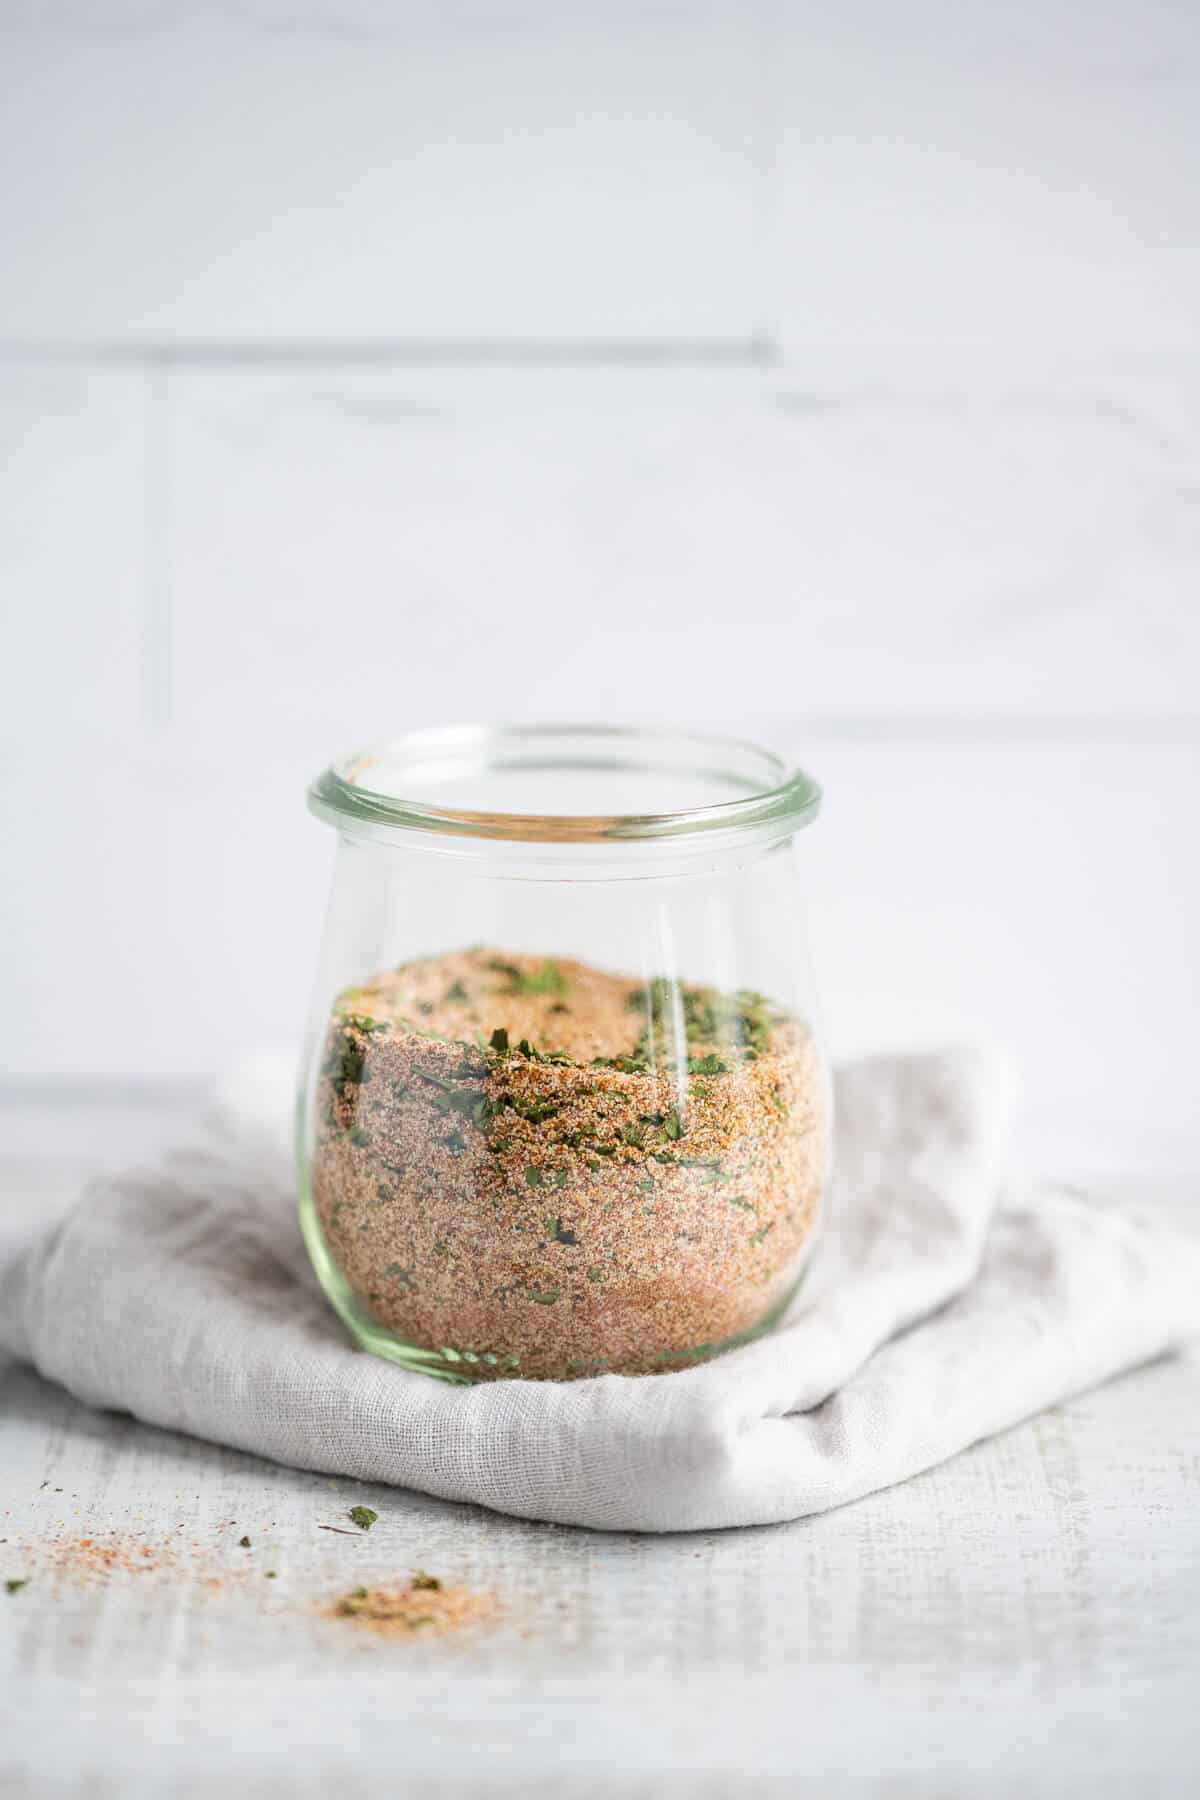 Homemade Seasoned Salt in a glass Weck jar, sitting on top of a gray folded towel.